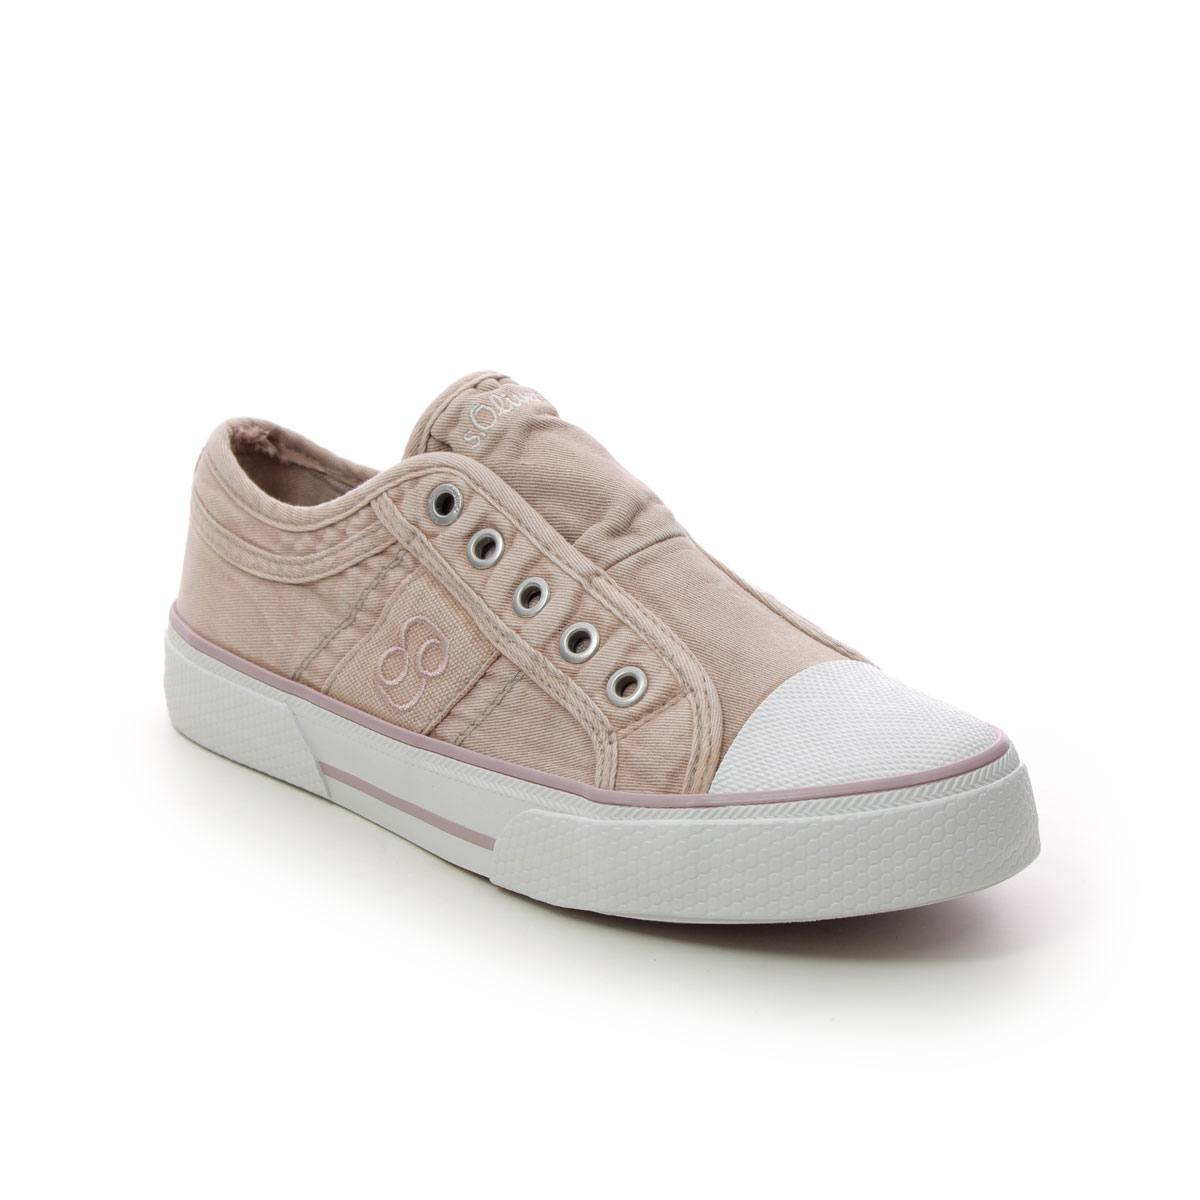 S Oliver Mustang 31 pink trainers Womens 24635-30544 Rose